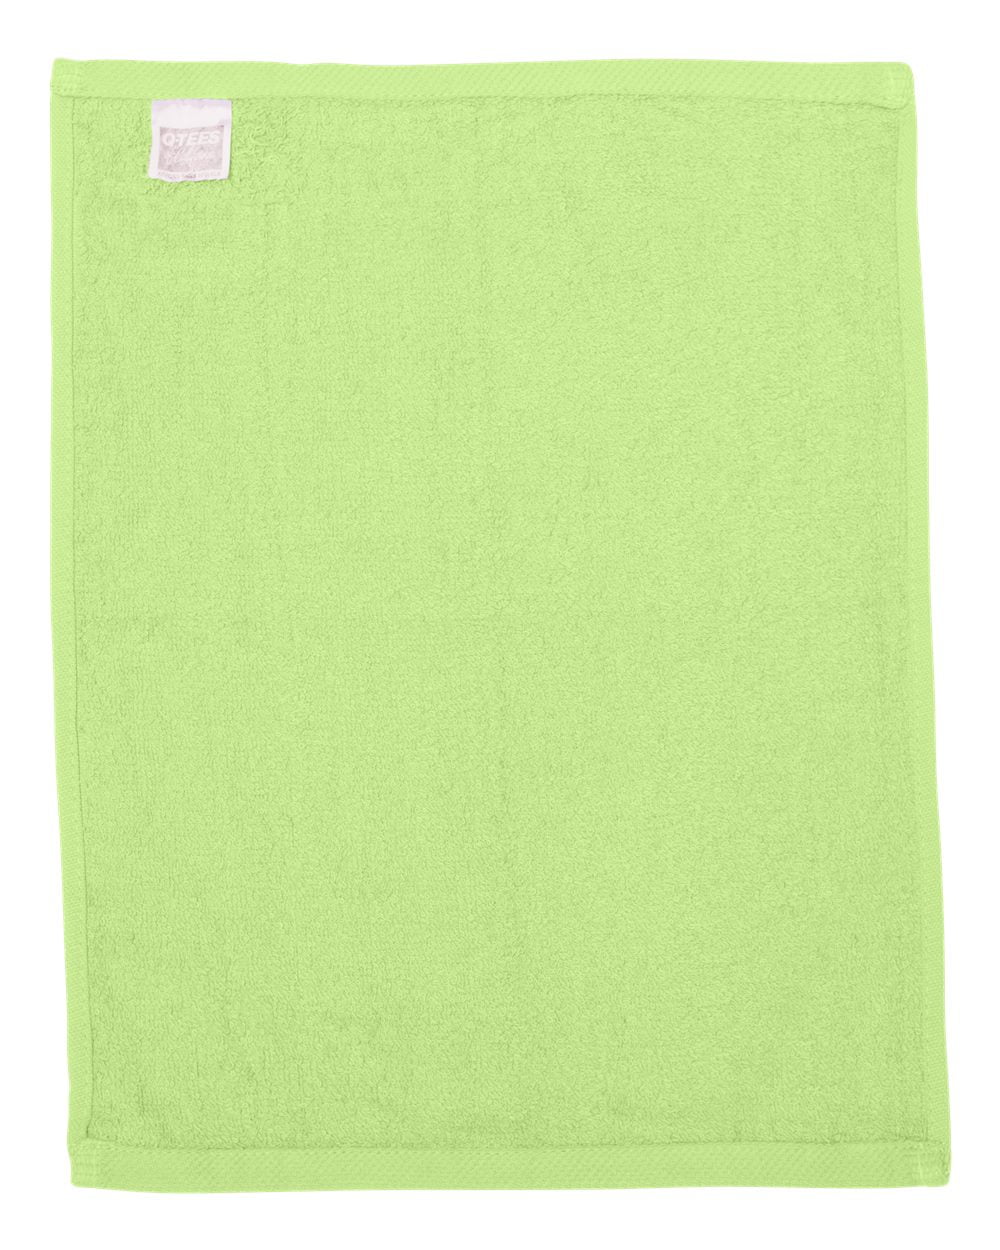 Q-Tees Hemmed Fingertip Towel T600   *17 Colors to Choose From* 